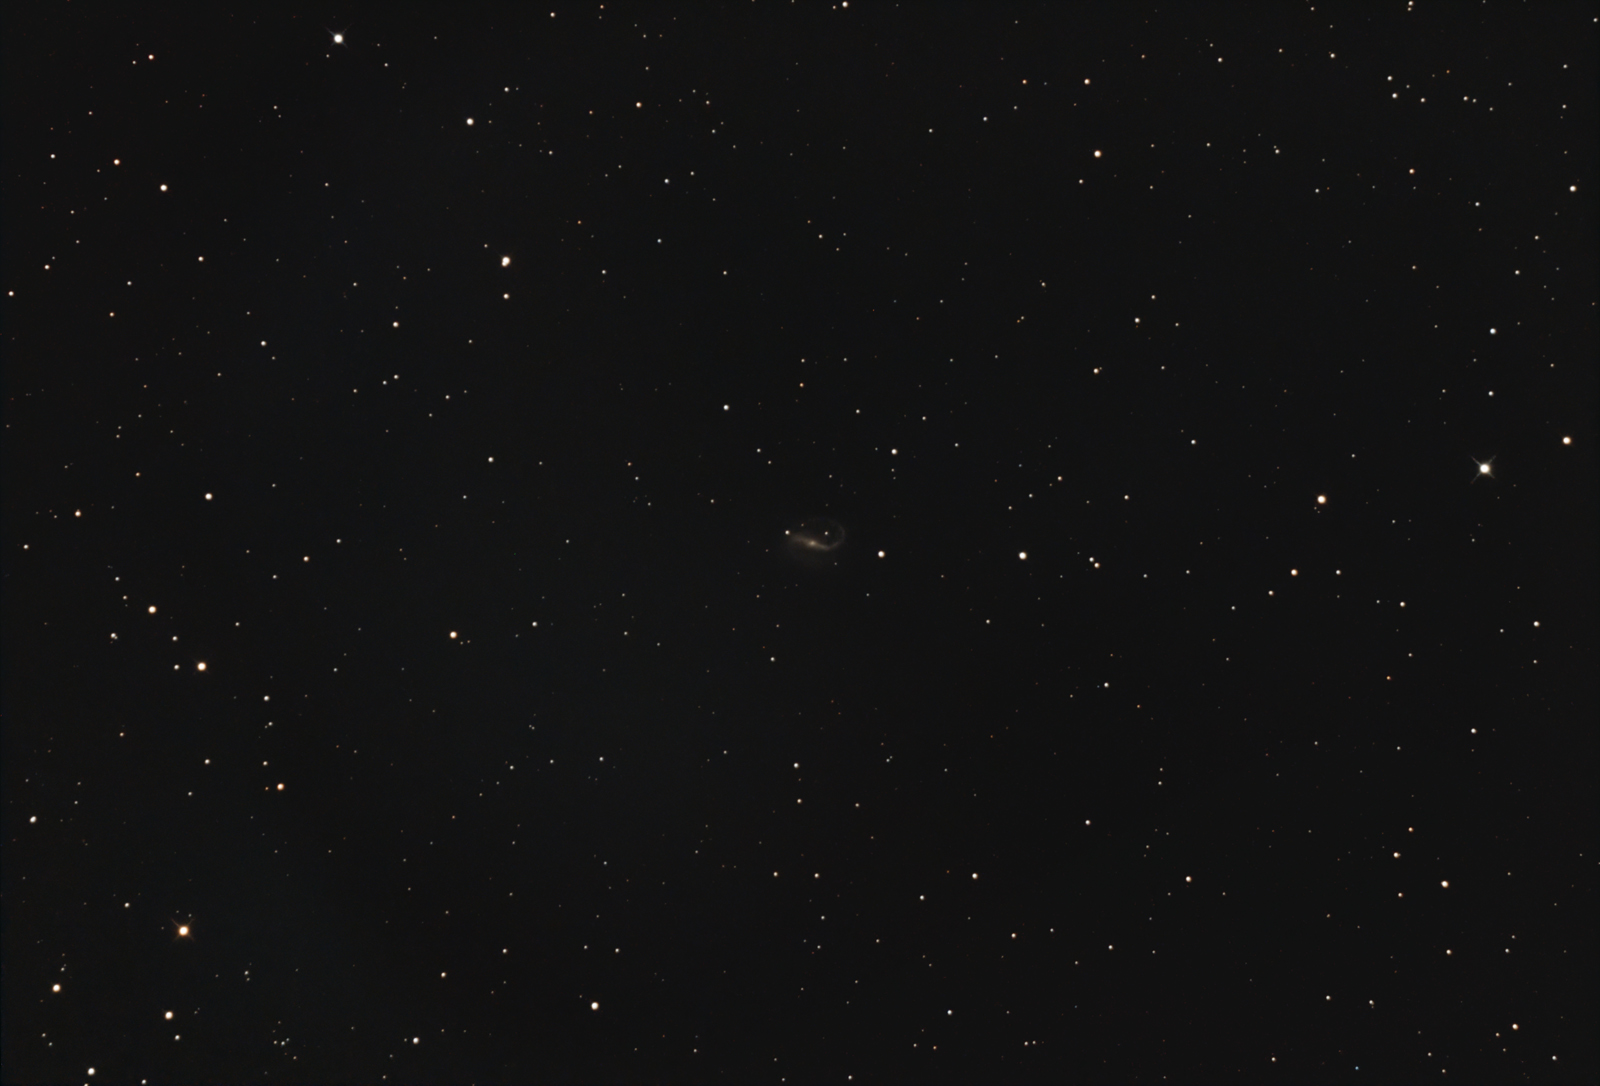 NGC7479 VX8 294 g300 Br8 lpsd3 29F 435S PS23 10182022m